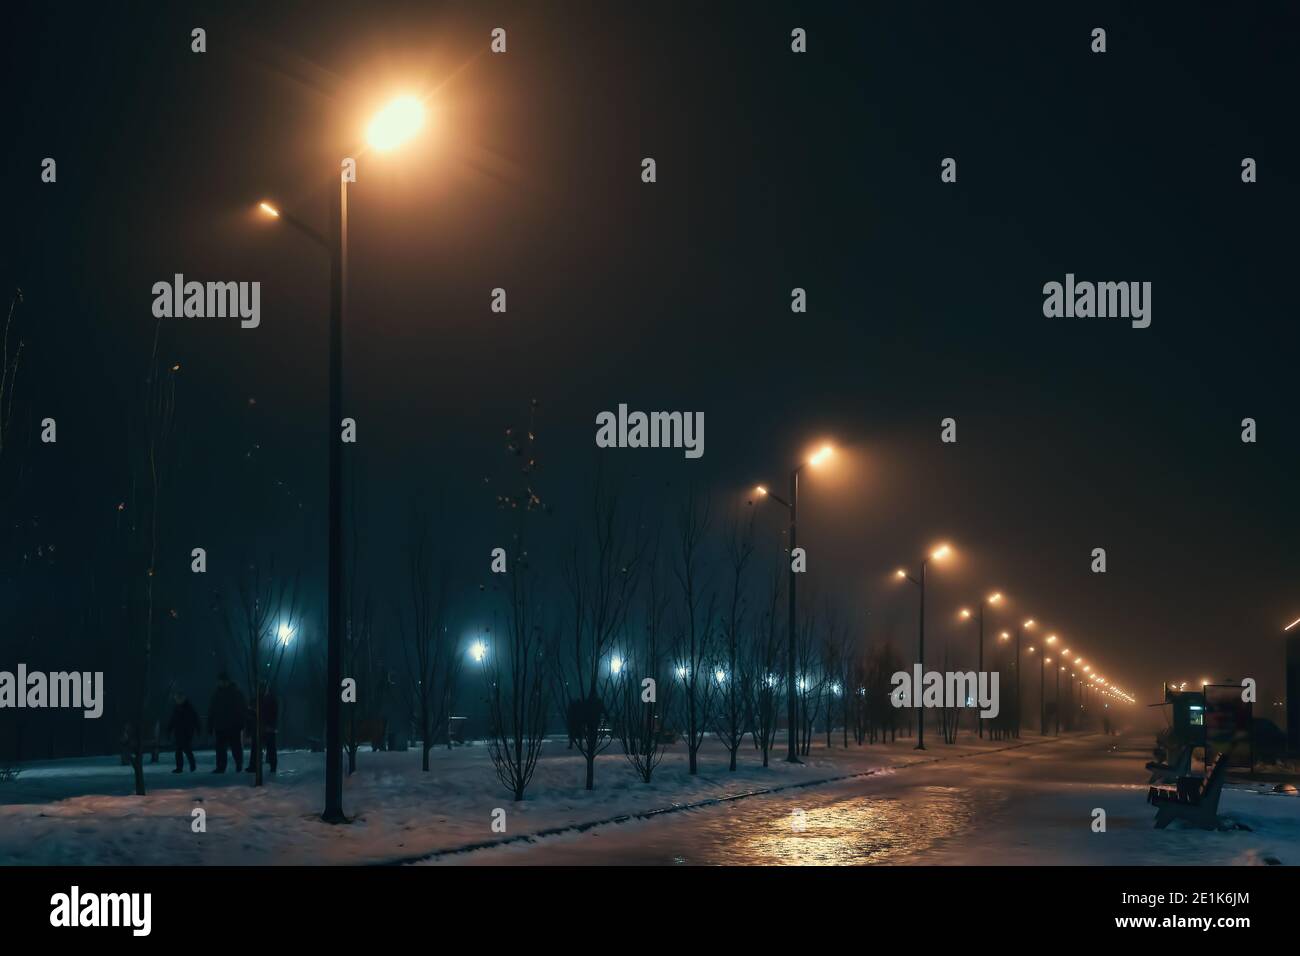 Urban alley in foggy winter night illuminated by street lamps. Stock Photo